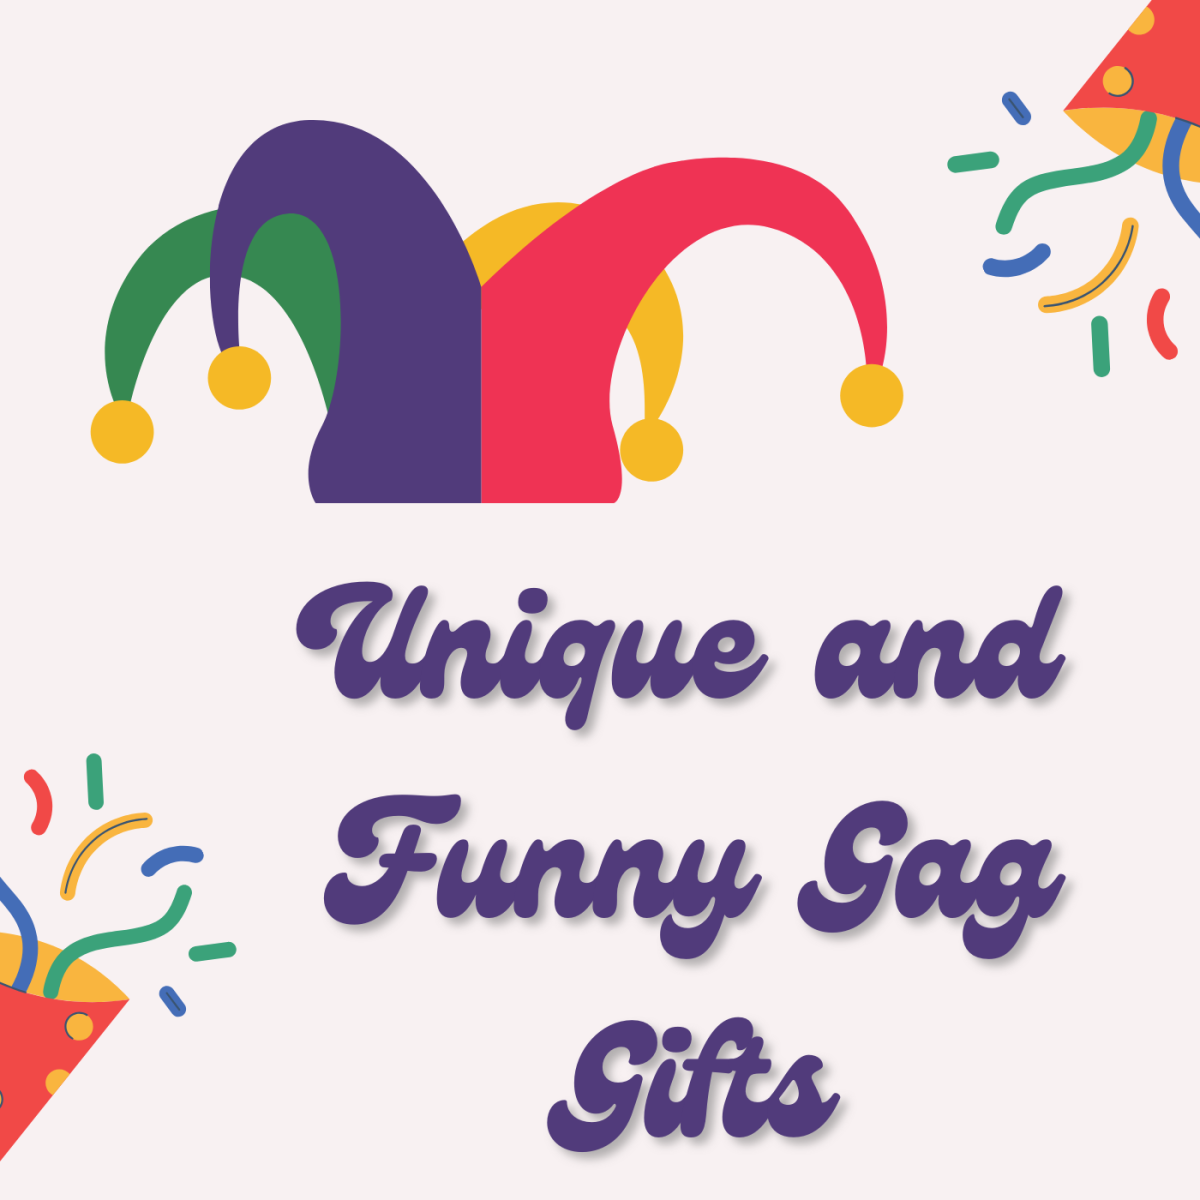 Make someone's day by giving them a funny gift!